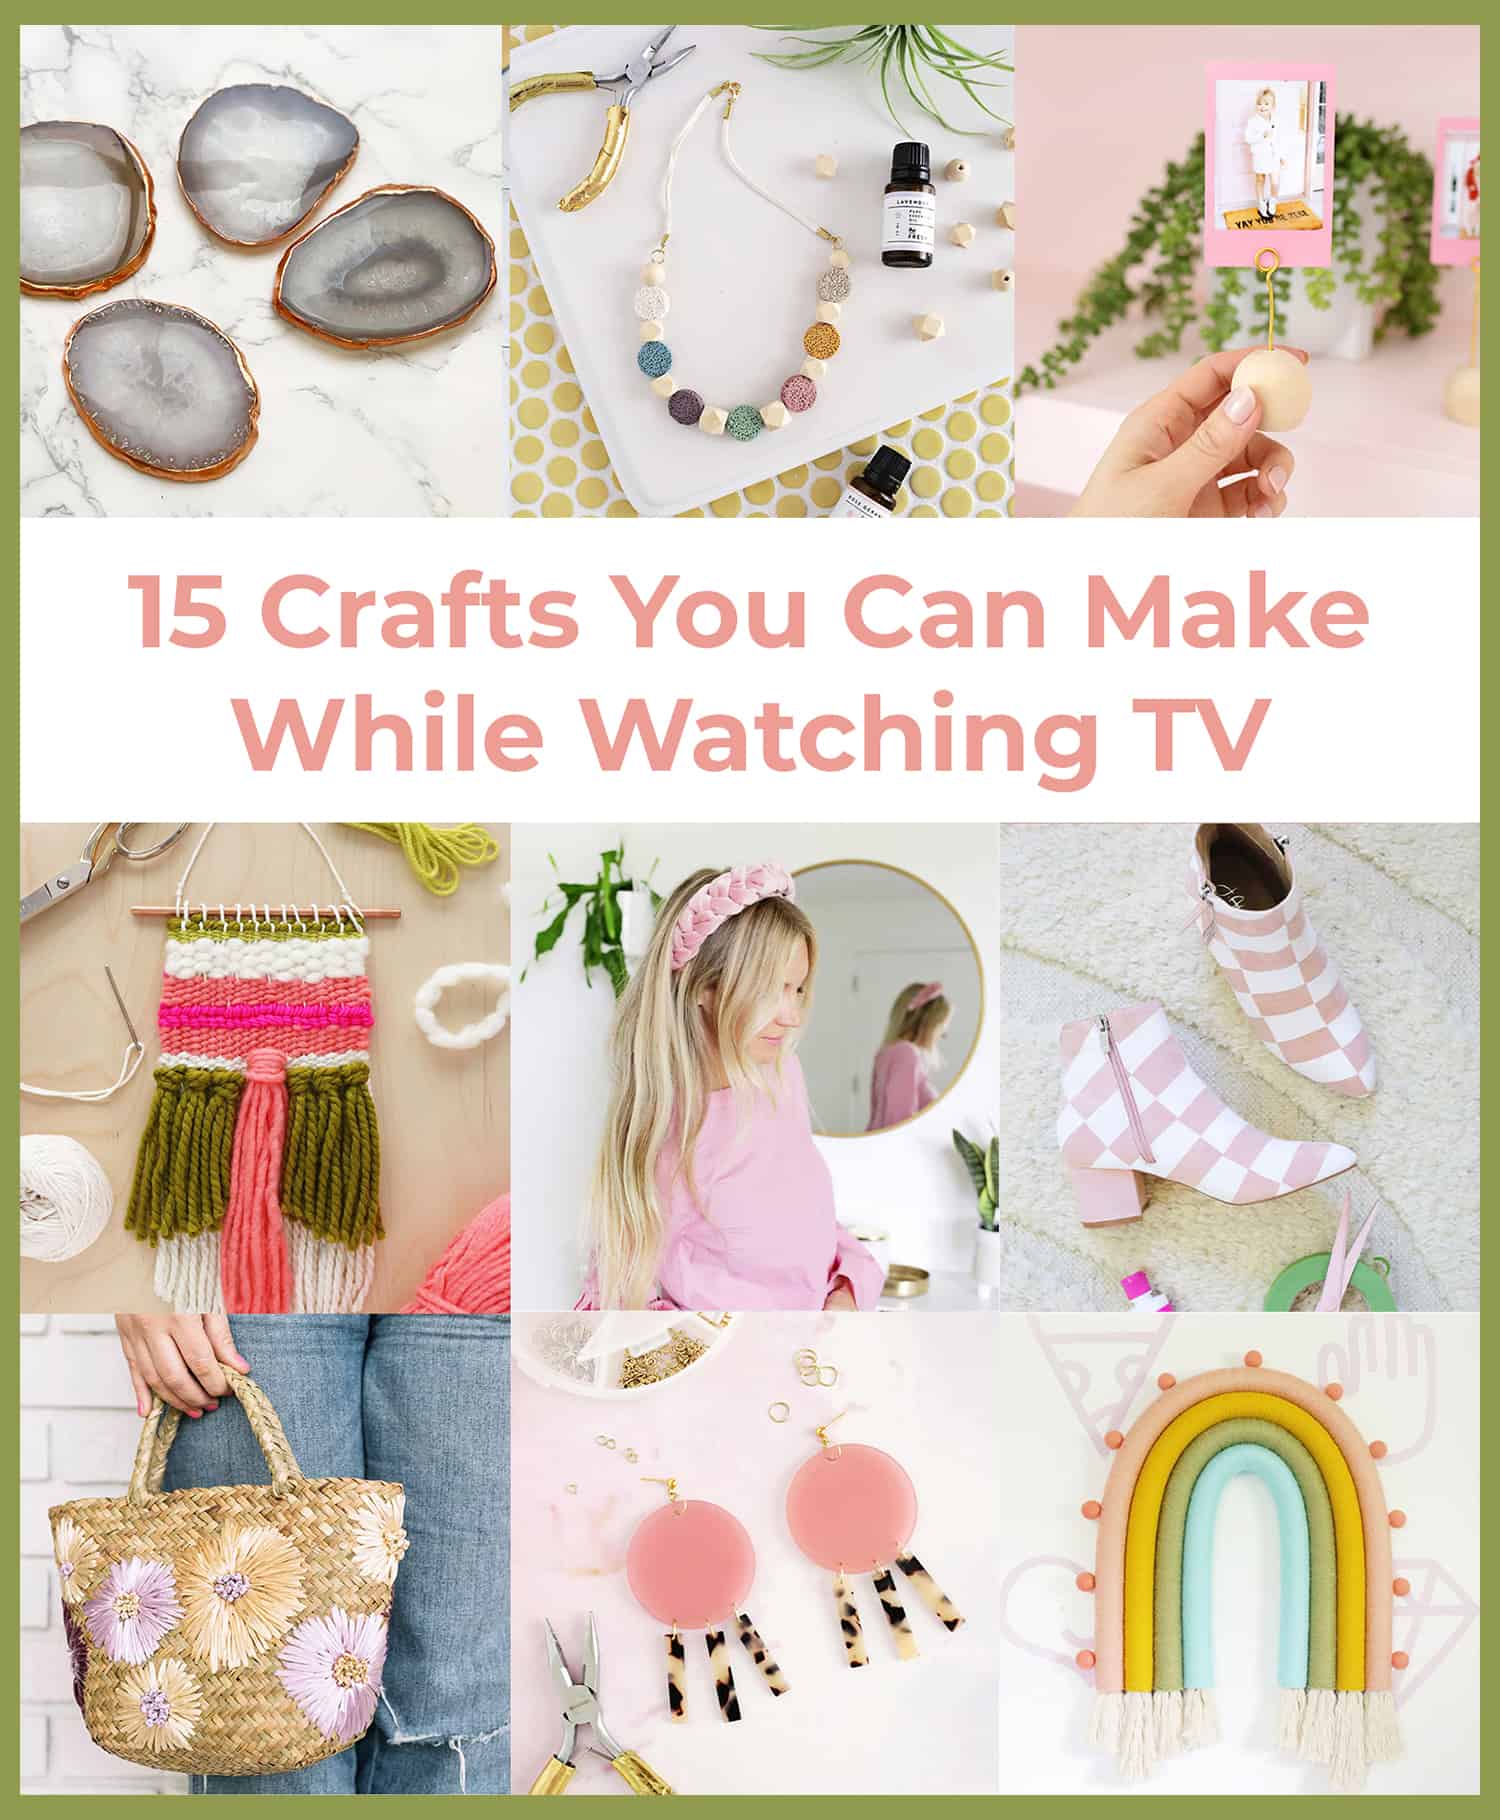 15 crafts you can make while watching TV